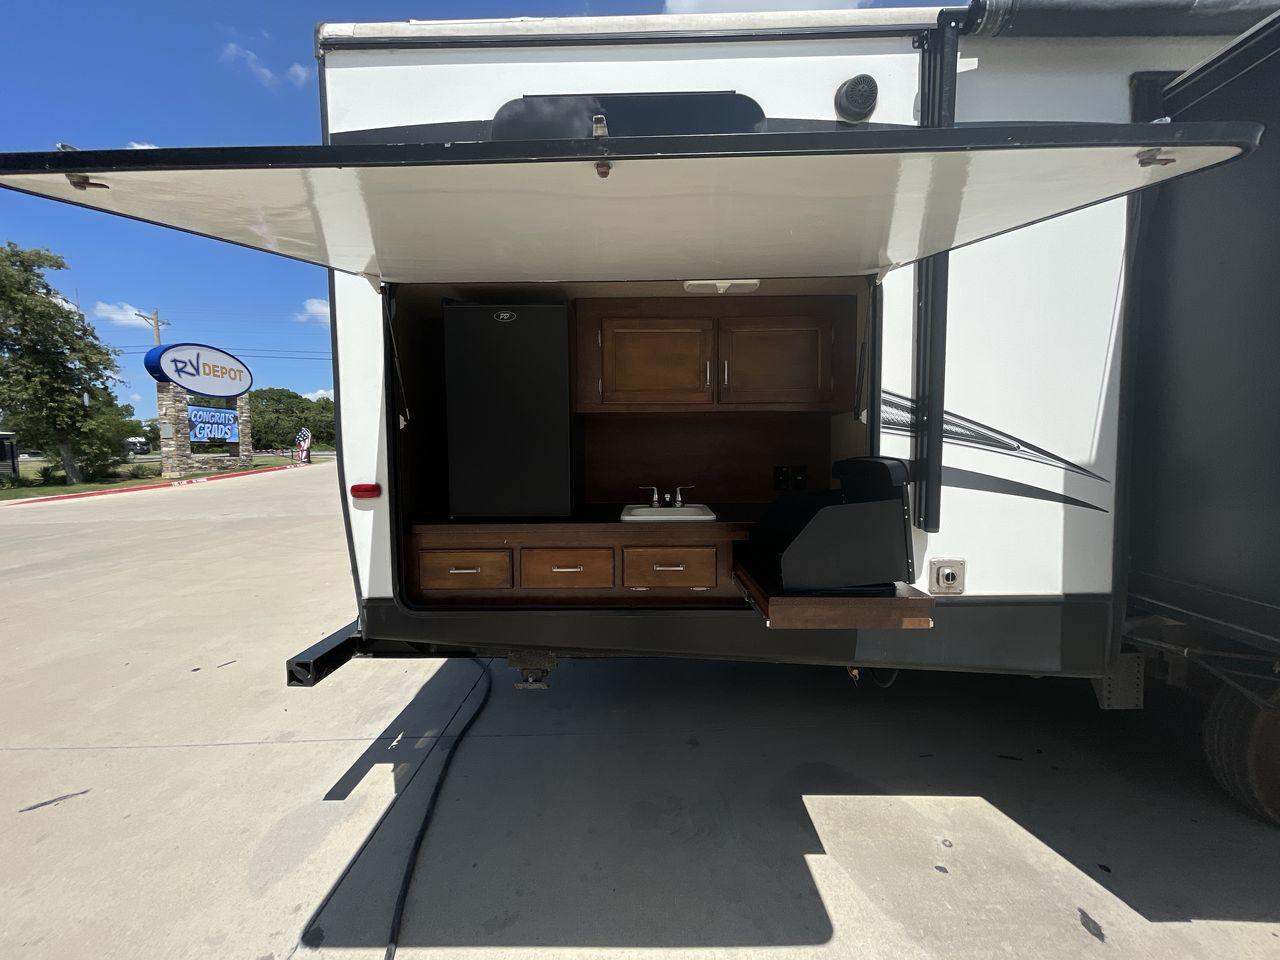 2018 BLACK KEYSTONE RV OUTBACK 325BH (4YDT32520JB) , Length: 37.42 ft. | Dry Weight: 8,428 lbs. | Gross Weight: 10,500 lbs. | Slides: 3 transmission, located at 4319 N Main St, Cleburne, TX, 76033, (817) 678-5133, 32.385960, -97.391212 - Gather the family inside this Outback Super Lite 325BH by Keystone RV, which features a bunkhouse, front bedroom, outside kitchen, and triple slides. The dimensions of this 325BH model are 37.42 ft in length, 8 ft in width, and 11.33 ft in height. It has a dry weight of 8,428 lbs with a payload capa - Photo #24